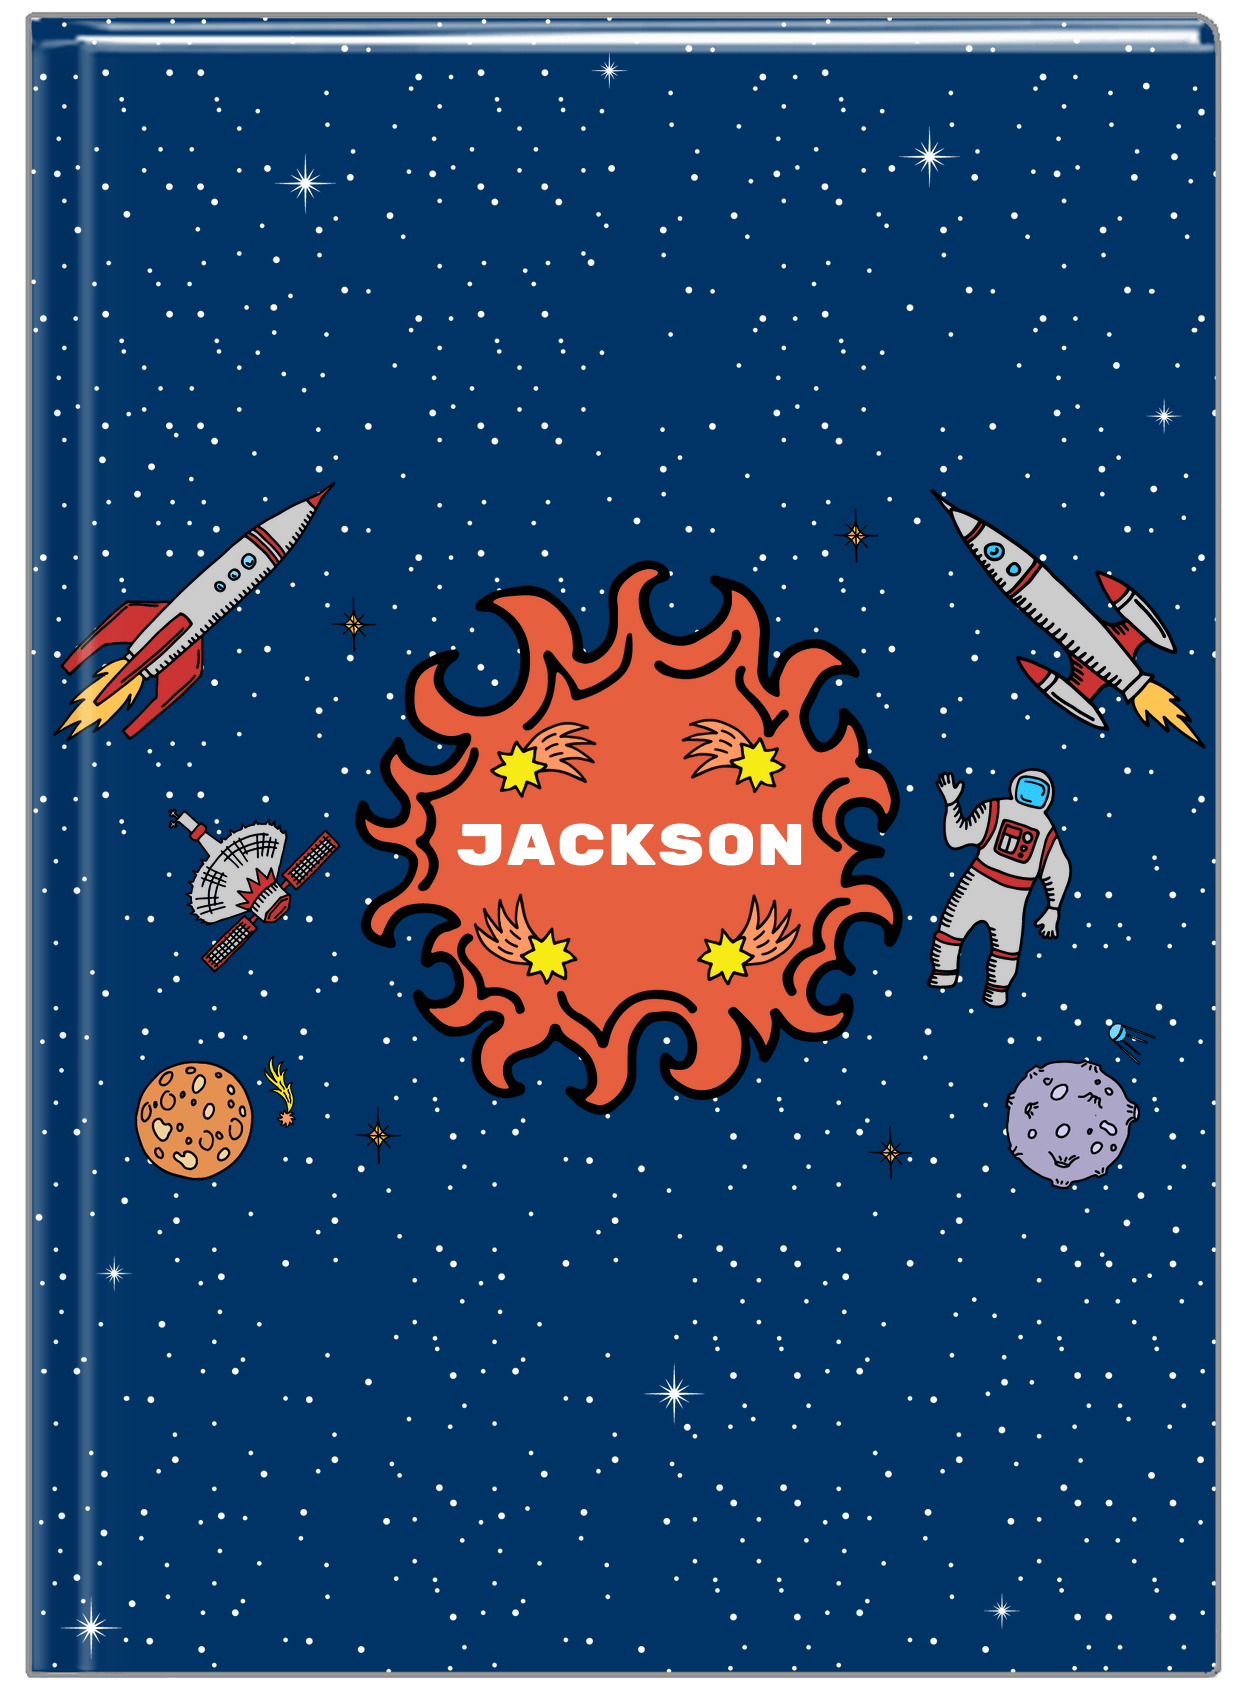 Personalized Rocket Ship Journal V - Fireball Galaxy - Blue Background - Front View